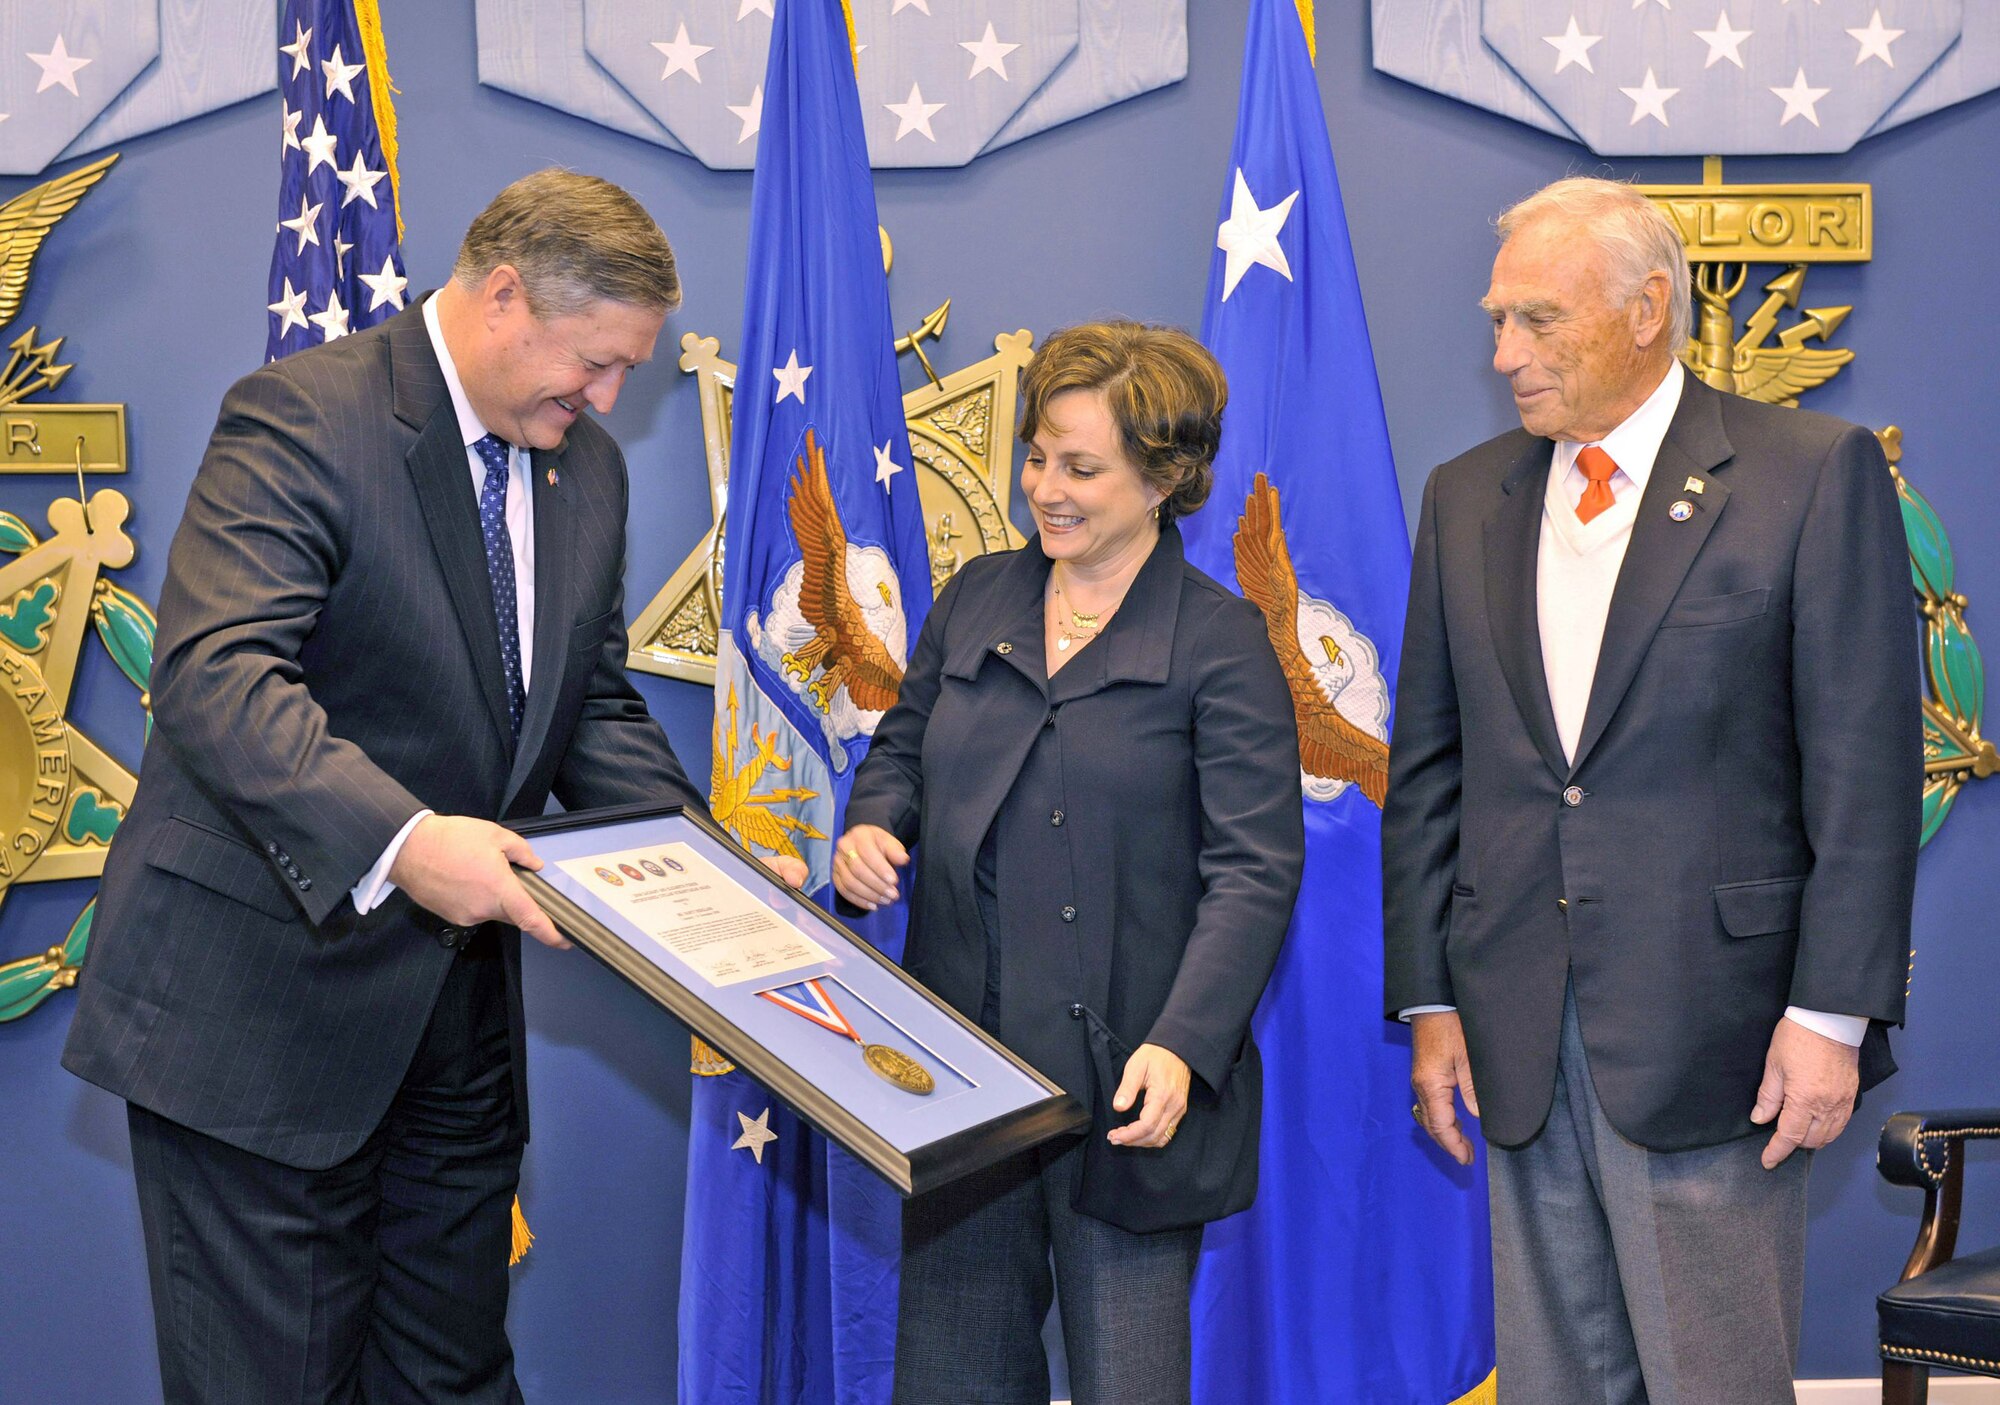 Secretary of the Air Force Michael Donley (left) presents a citation and medal to Nancy Berglass while Arnold Fisher looks on during a ceremony to present her the Zachary and Elizabeth Fisher Distinguished Civilian Humanitarian Award at the Pentagon's Hall of Heroes Jan. 28, 2010. The multidepartmental award was established in 1996 and is presented to those exemplifying personal qualities of patriotism, generosity, and selfless dedication to improving the quality of life of members of the armed forces of the United States. (U.S. Air Force photo/Jim Varhegyi)